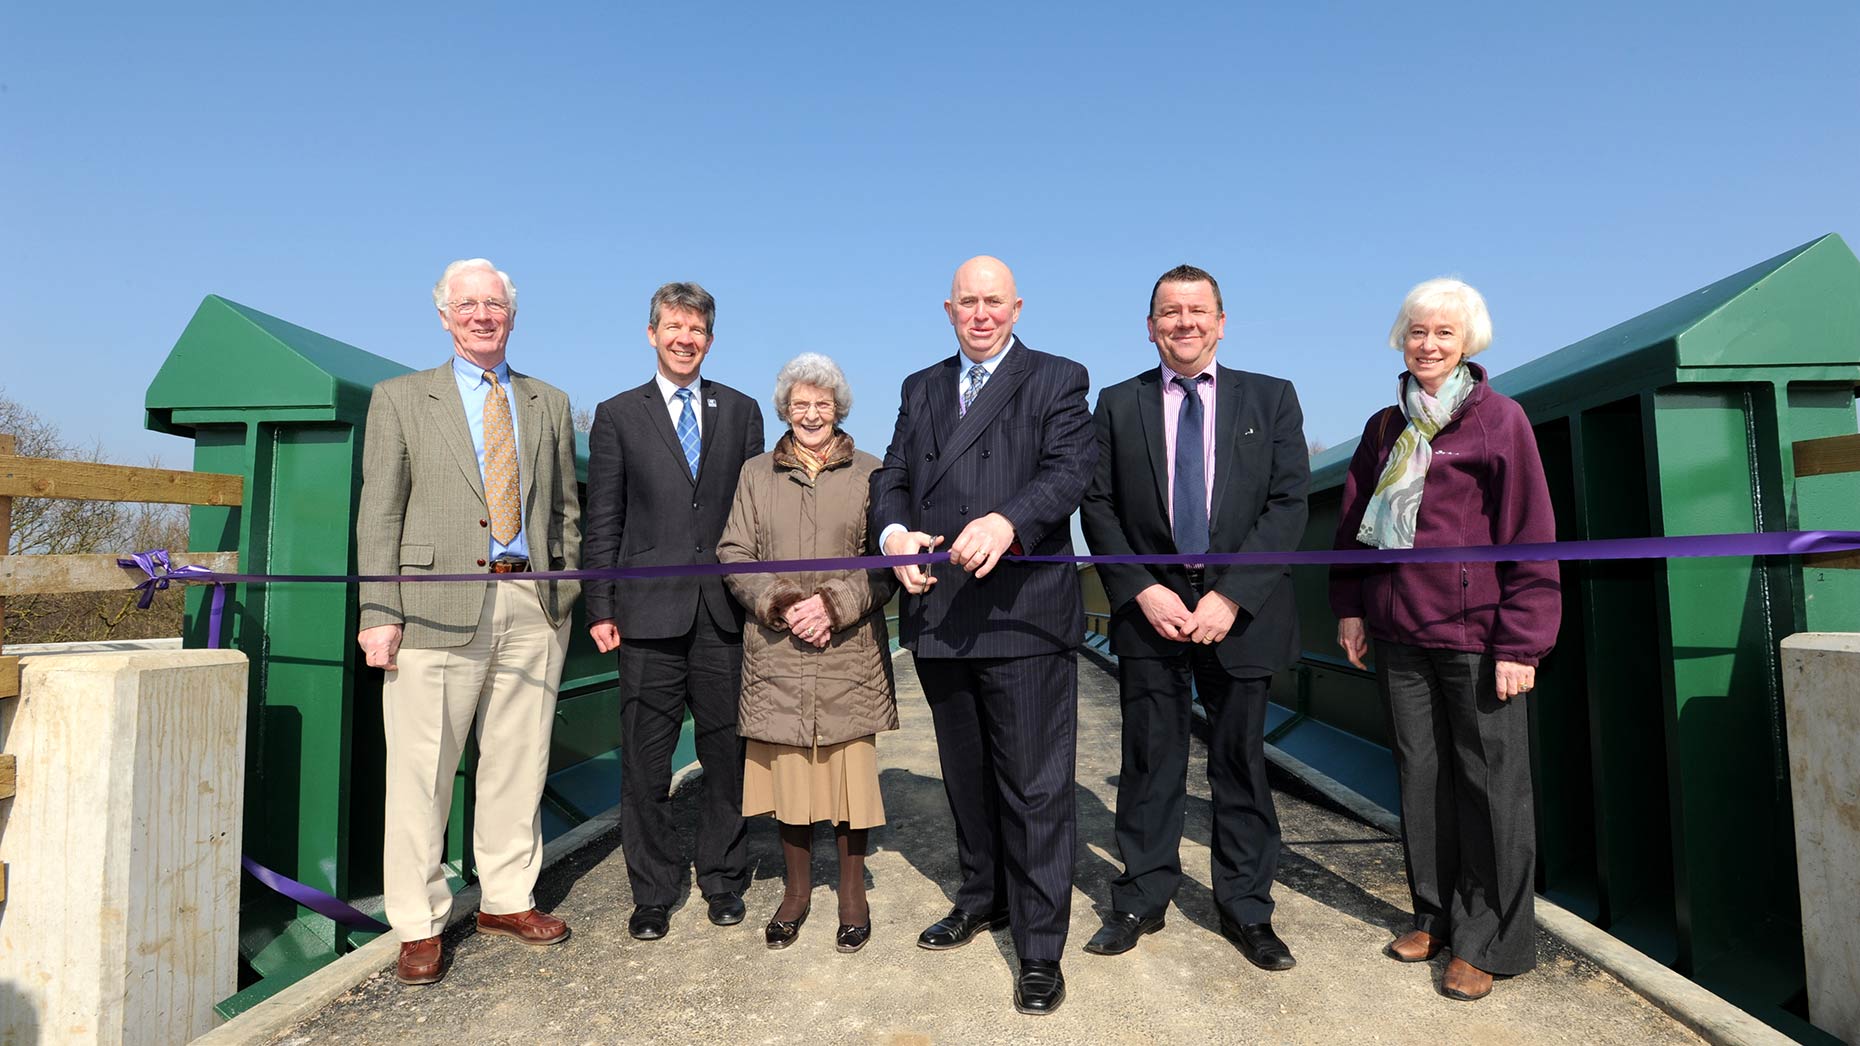 Left to right: Paul Learoyd, Chief Executive Lincolnshire Wildlife Trust; Geoff Trinder, Chairman, Lincolnshire Wildlife Trust; Cllr Mrs Marion Brighton OBE, Leader of North Kesteven District Council and member of Whisby Steering Board; Cllr Colin Davie, executive member, Lincolnshire County Council; Kenneth Mason, Network Rail; Janet Mellor, Chairperson of Whisby Park Steering Board. Photo: Lincolnshire County Council